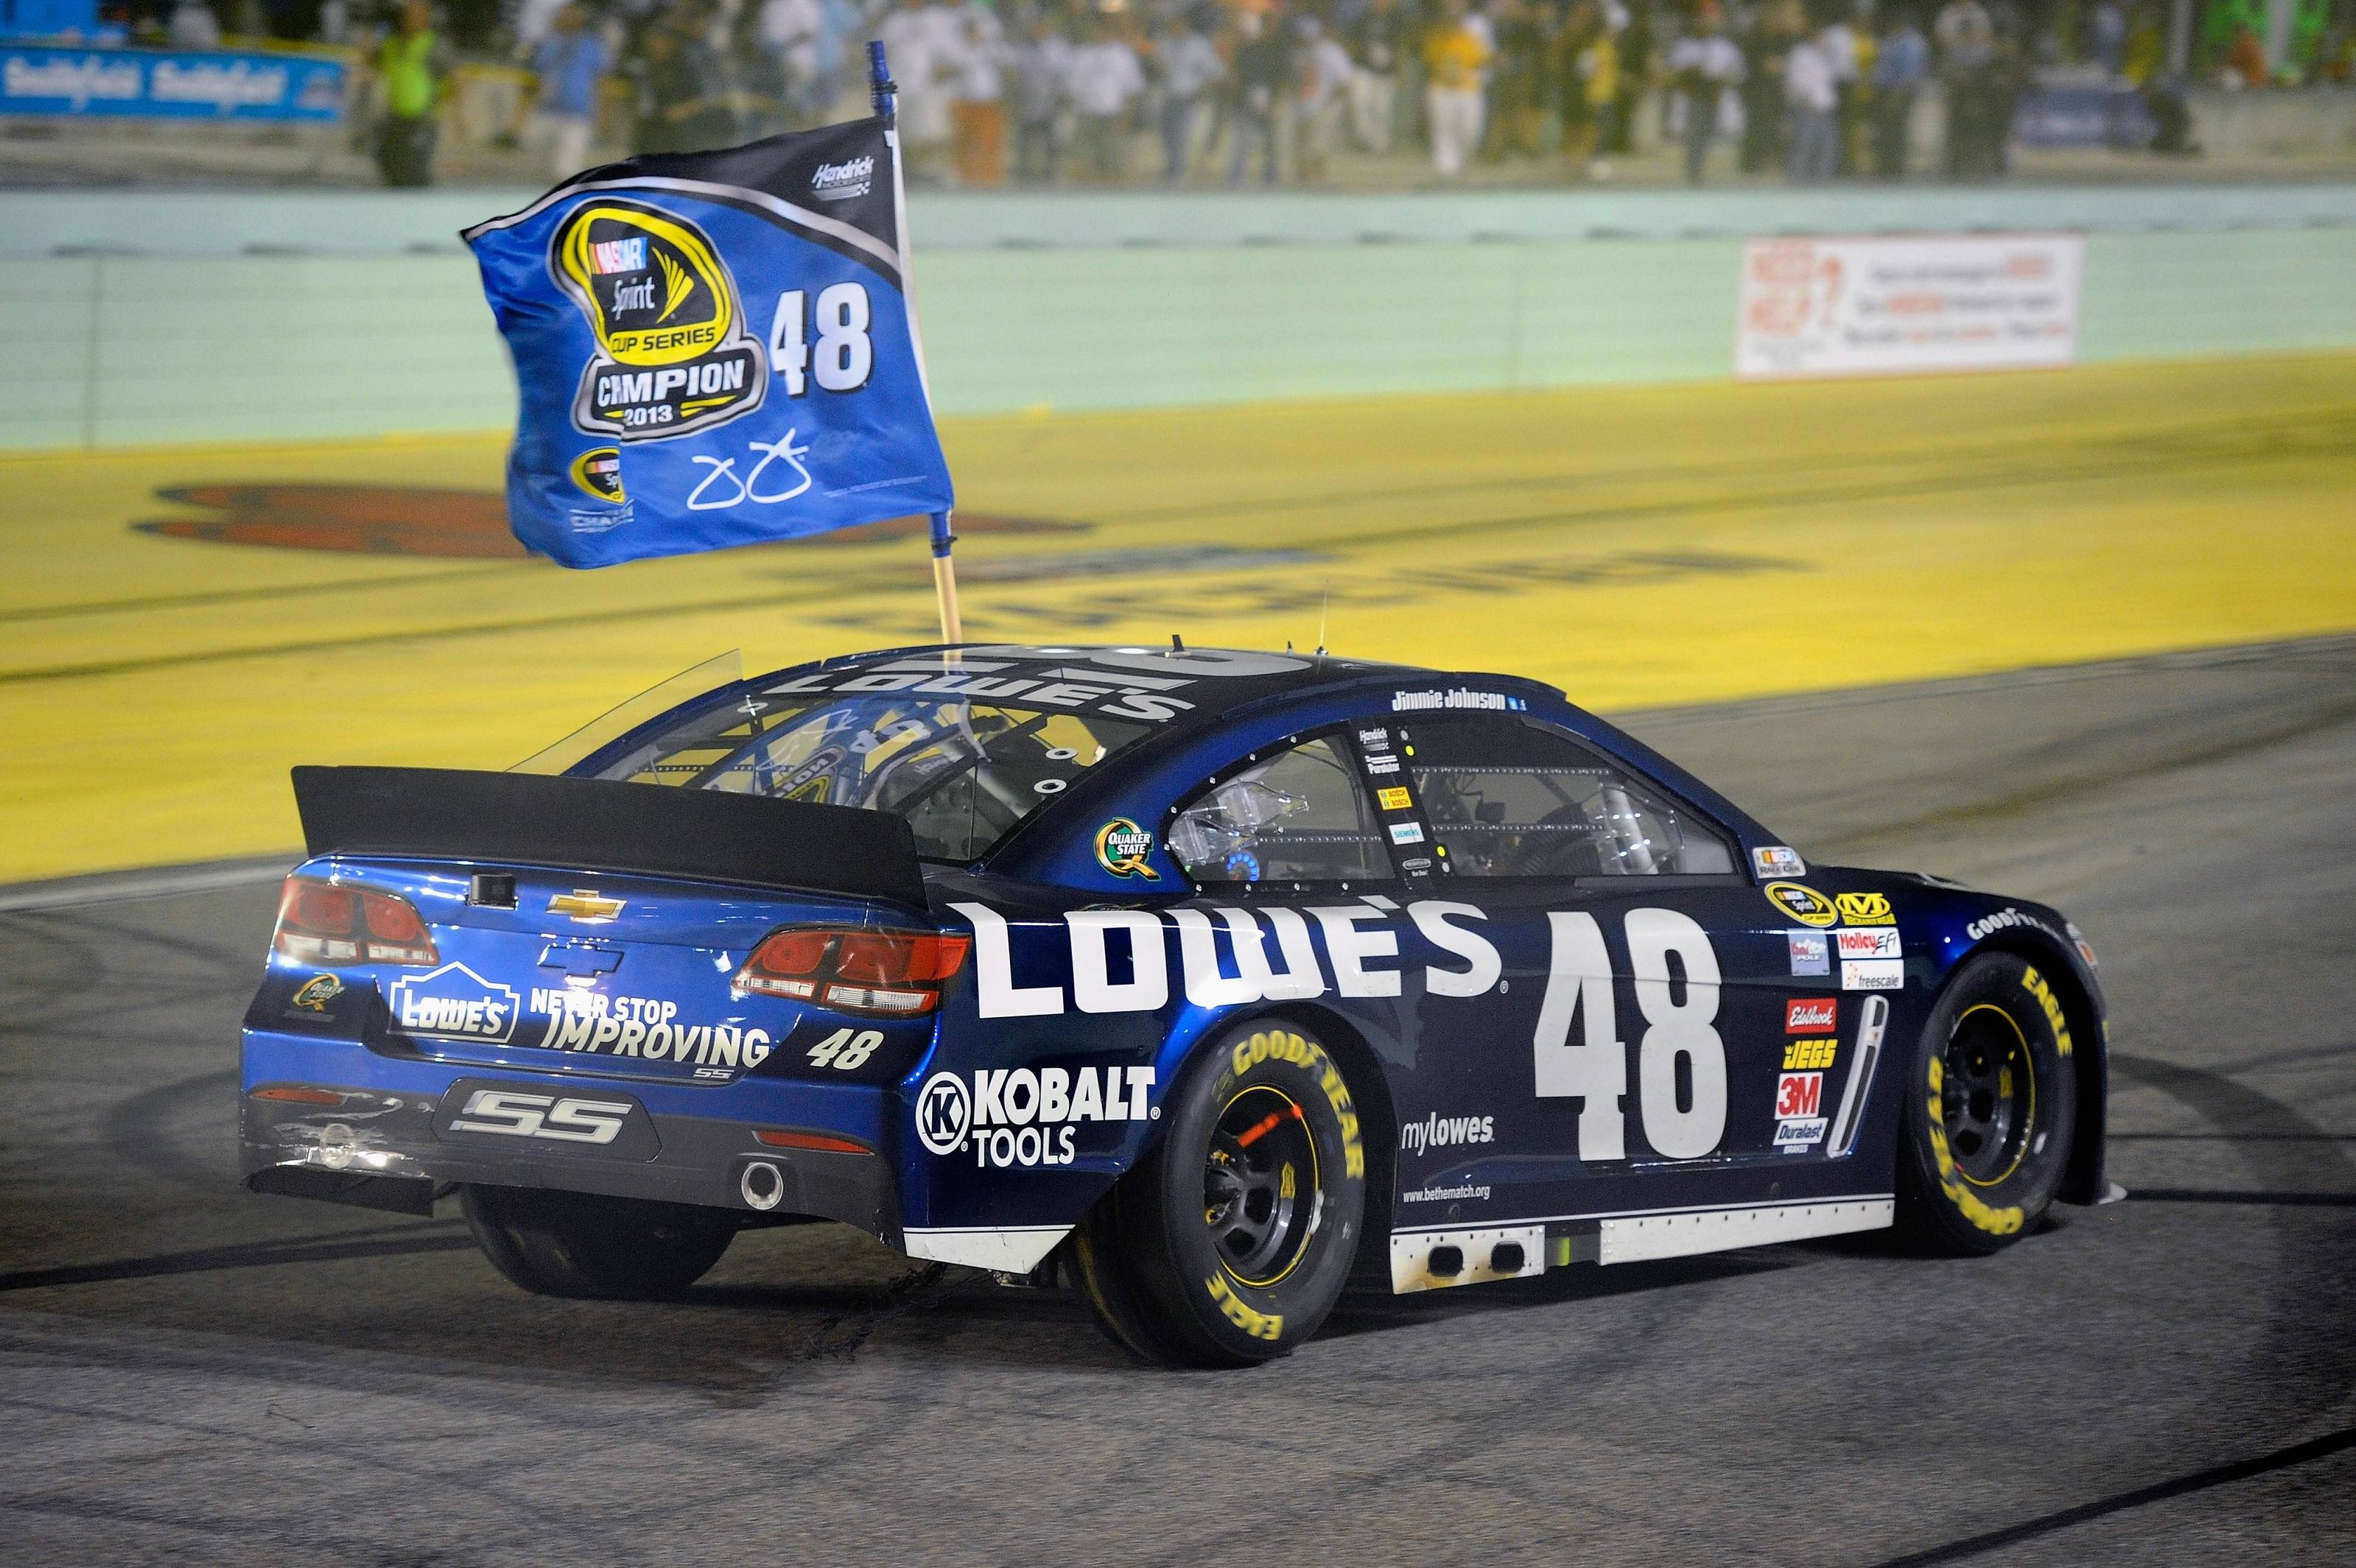 3198x2129 Jimmie Johnson Wallpaper 33 297899 Images HD Wallpapers| Wallfoy.com